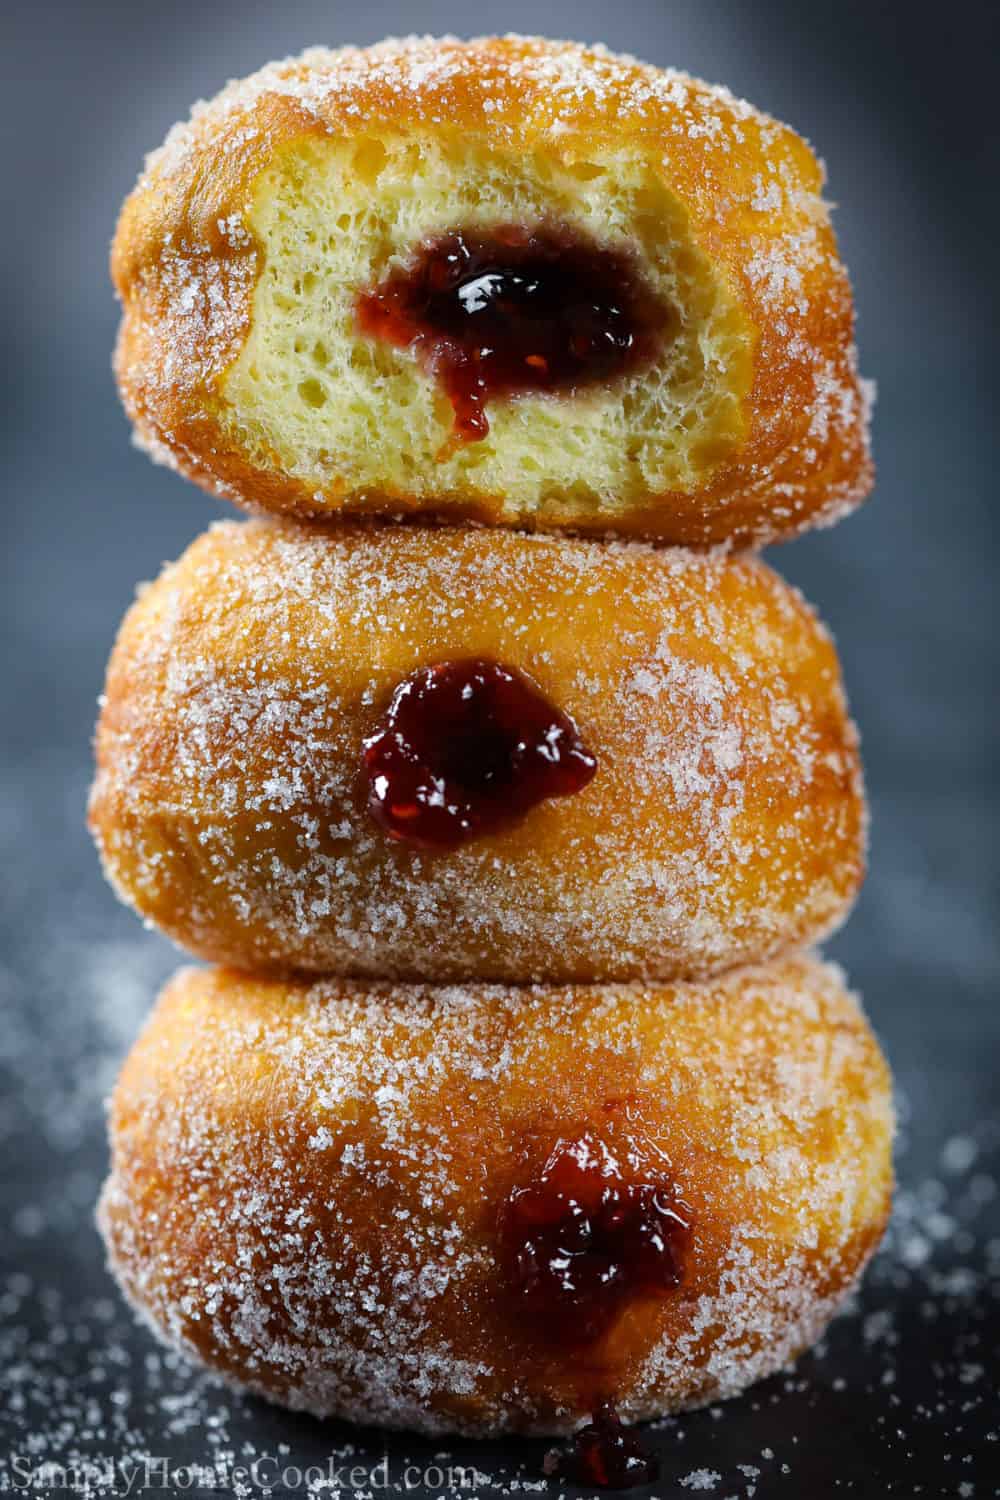 The Best Brioche Donuts Recipe - Simply Home Cooked